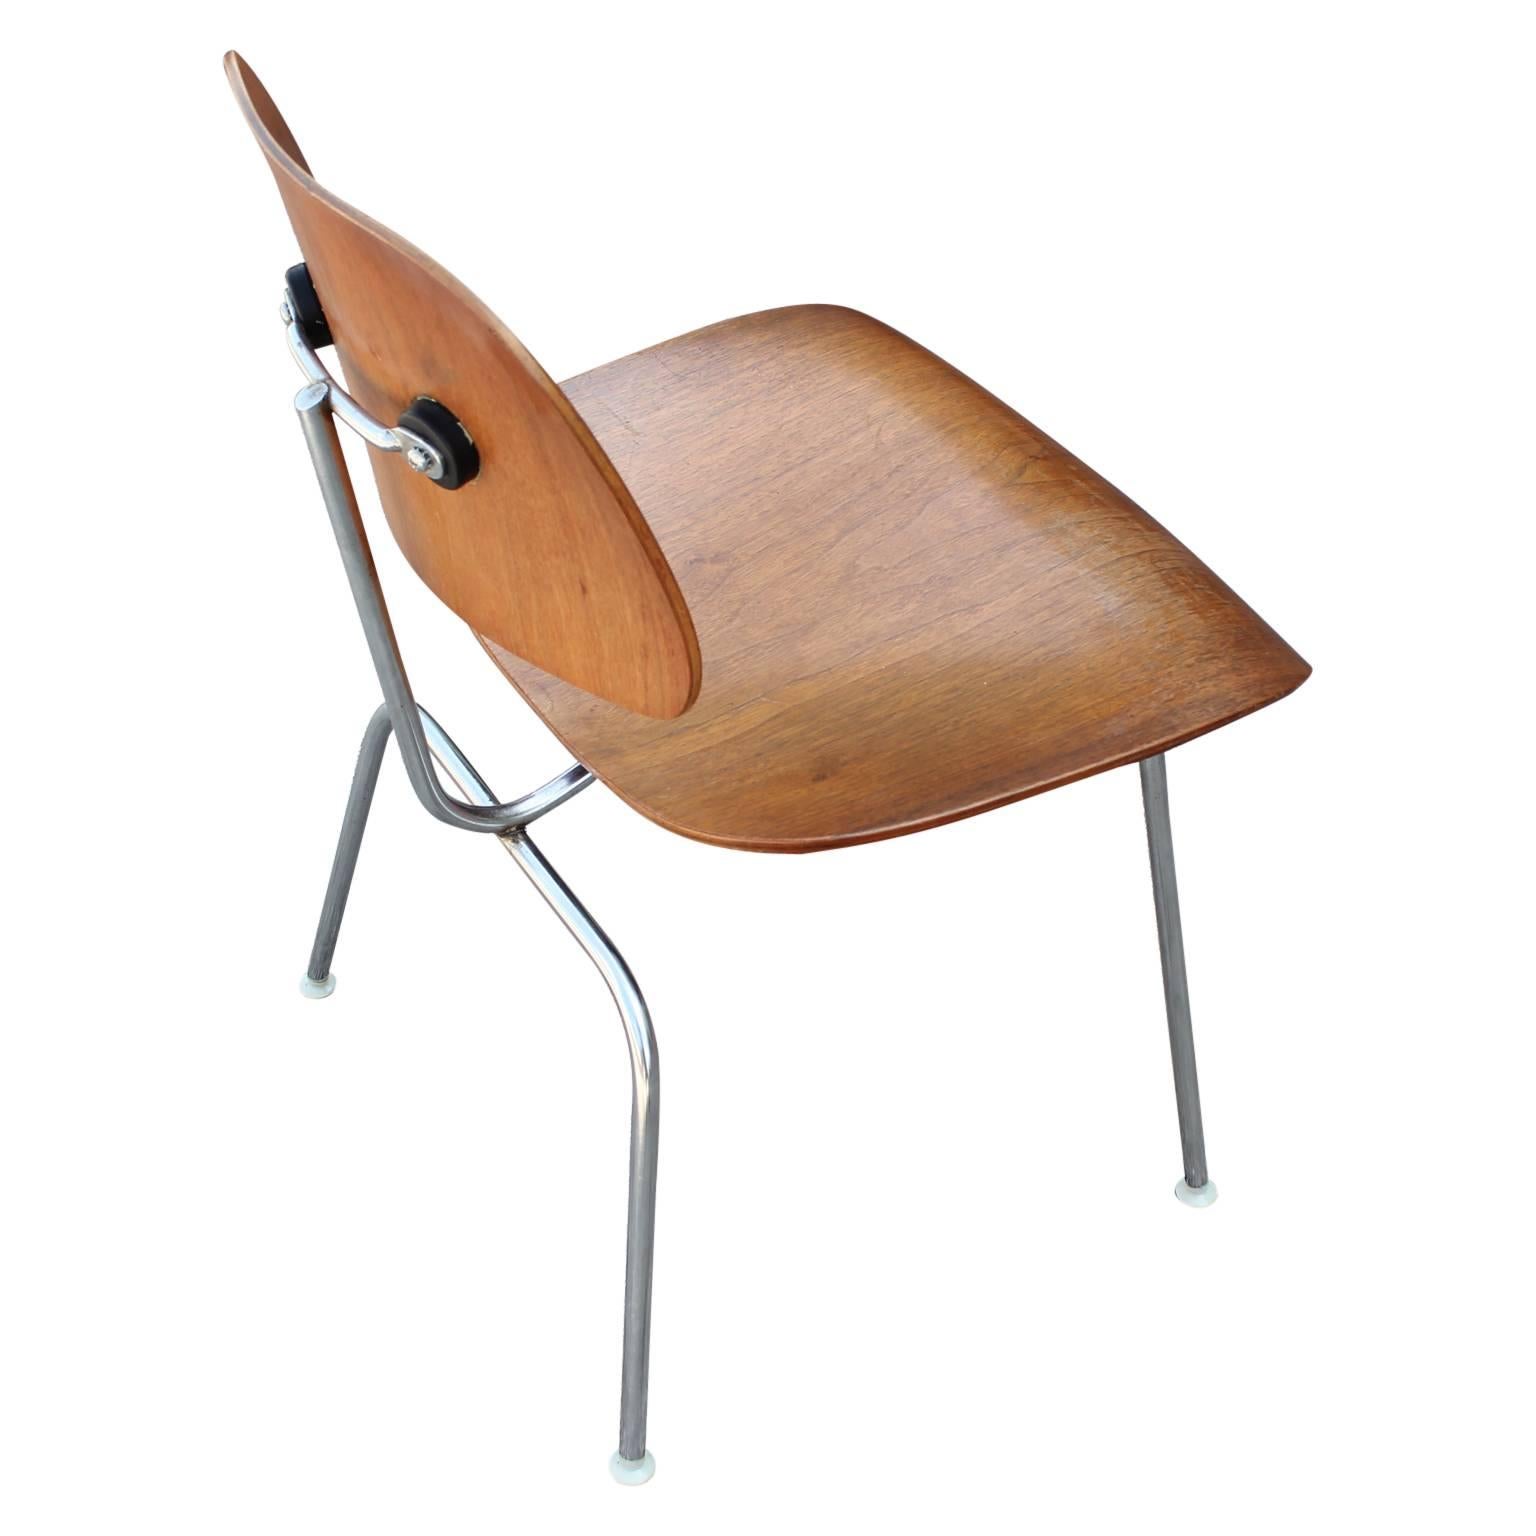 Mid-20th Century Pair of Modern DCM Dining or Side Chairs by Charles Eames for Herman Miller